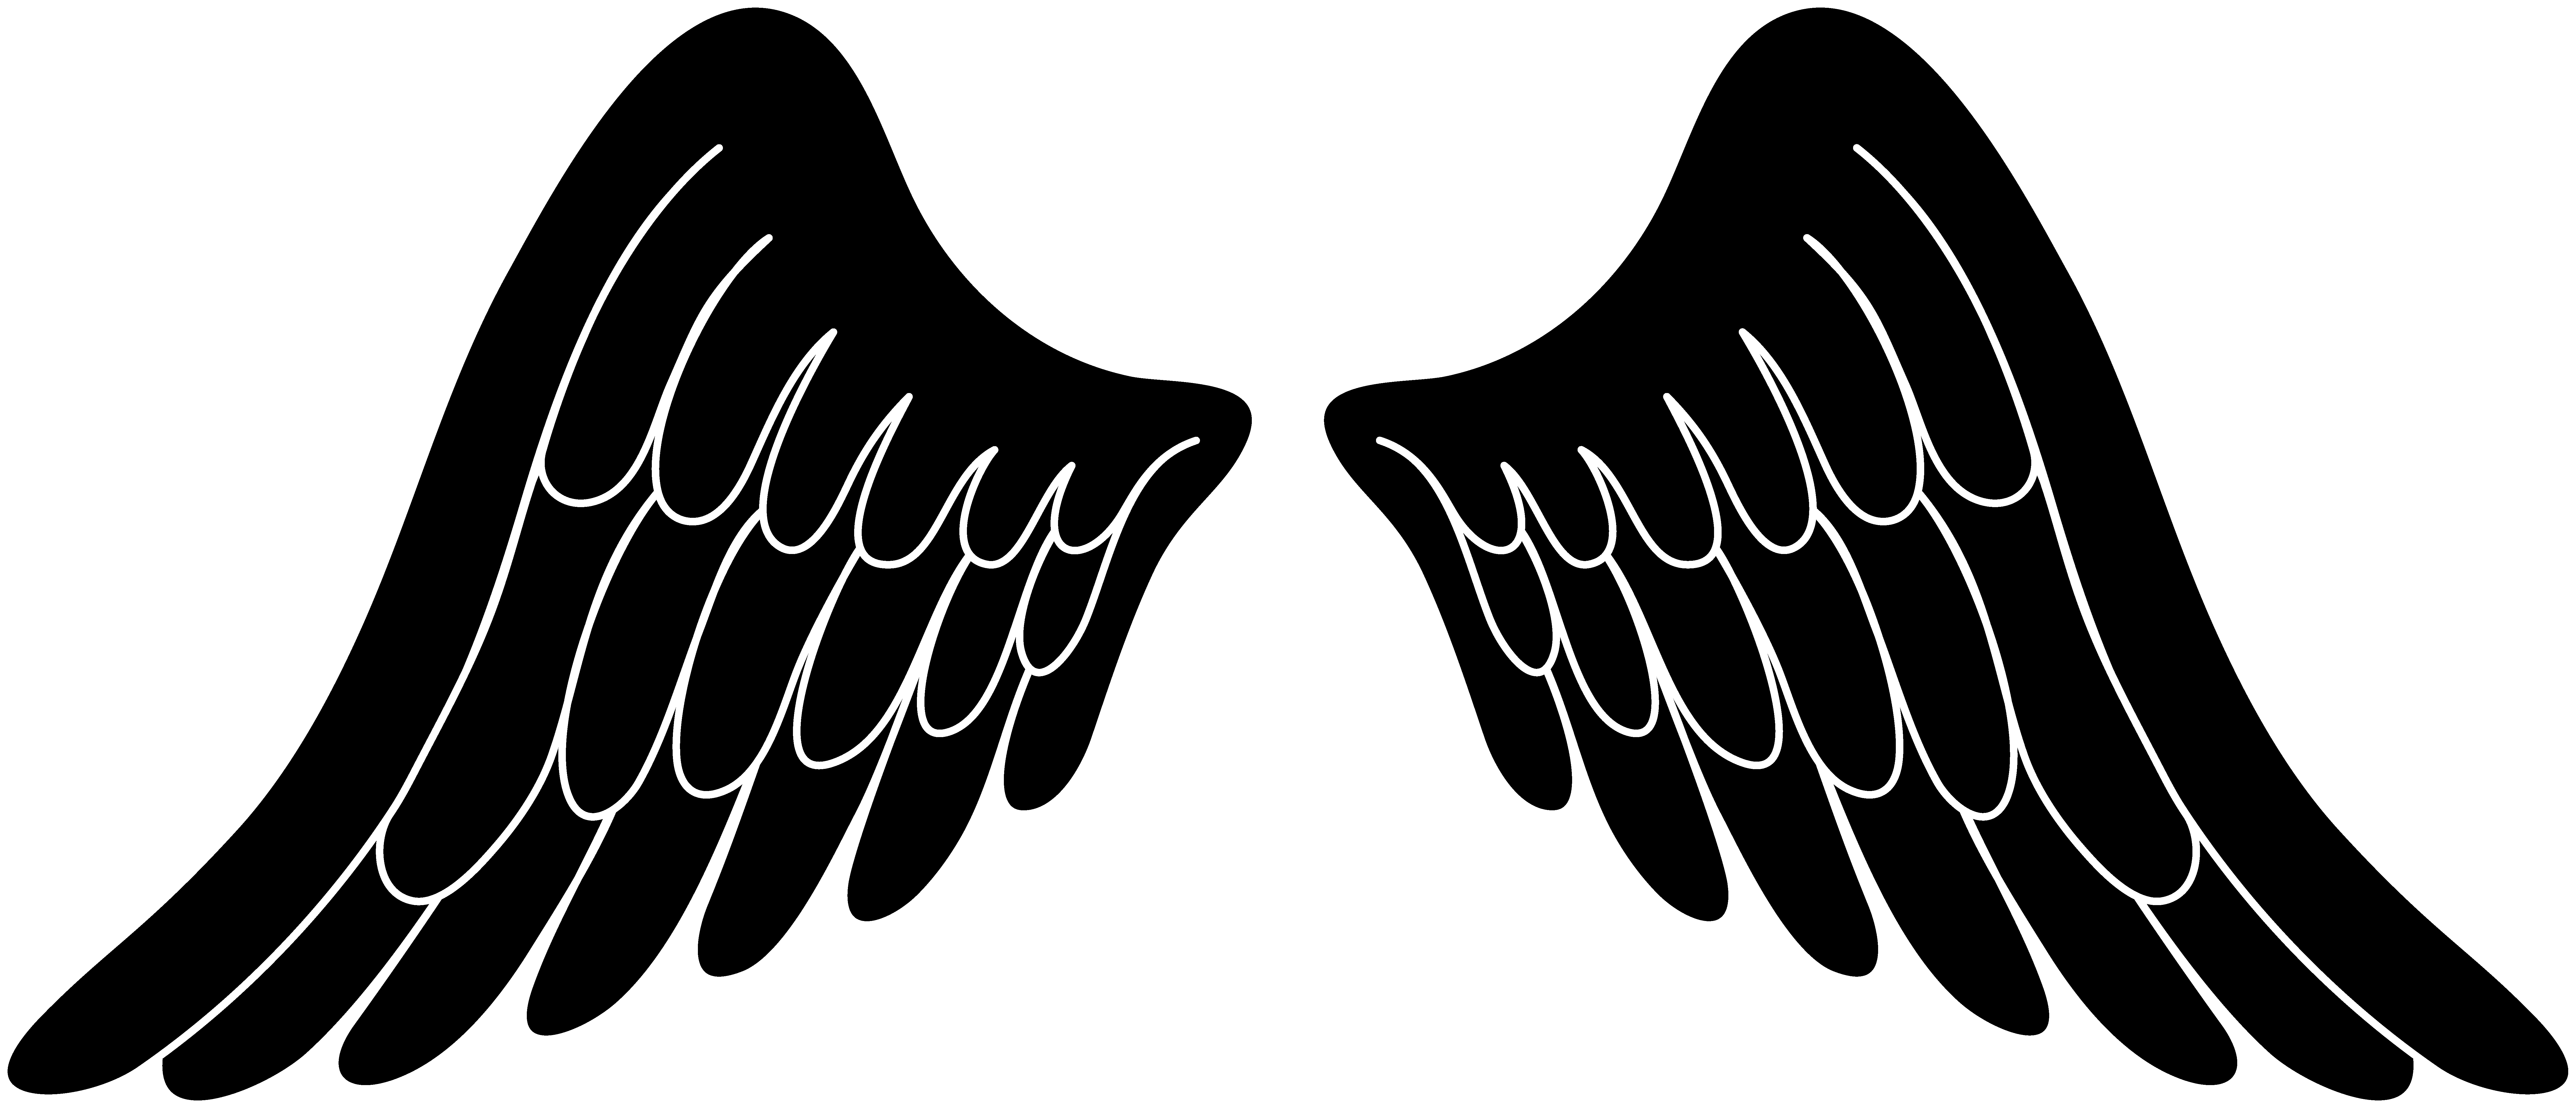 Black Silhouette Angel Wings Hd Photo Clipart